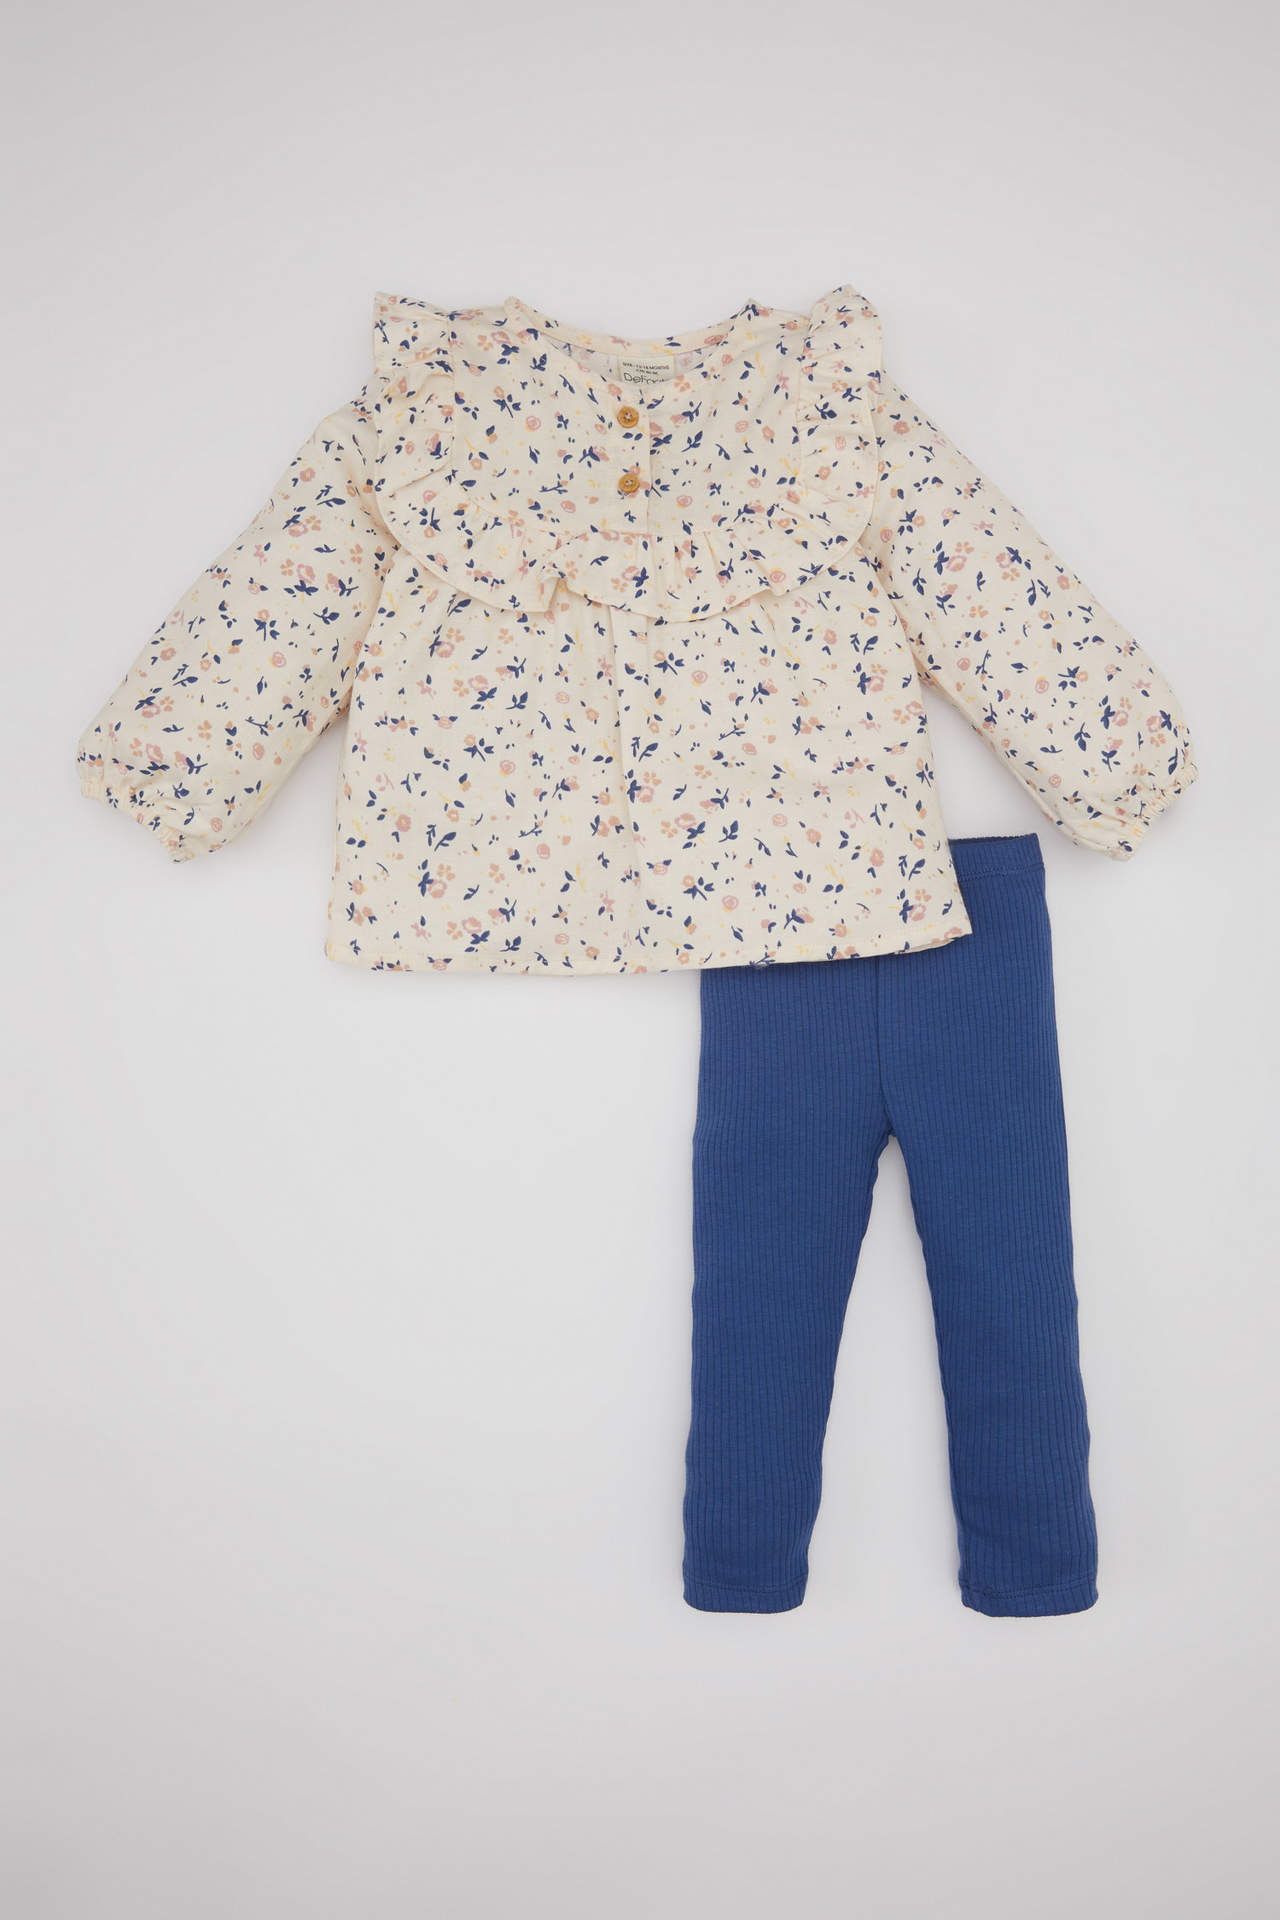 DEFACTO Baby Girl Floral Twill Shirt and Leggings 2 Piece Set